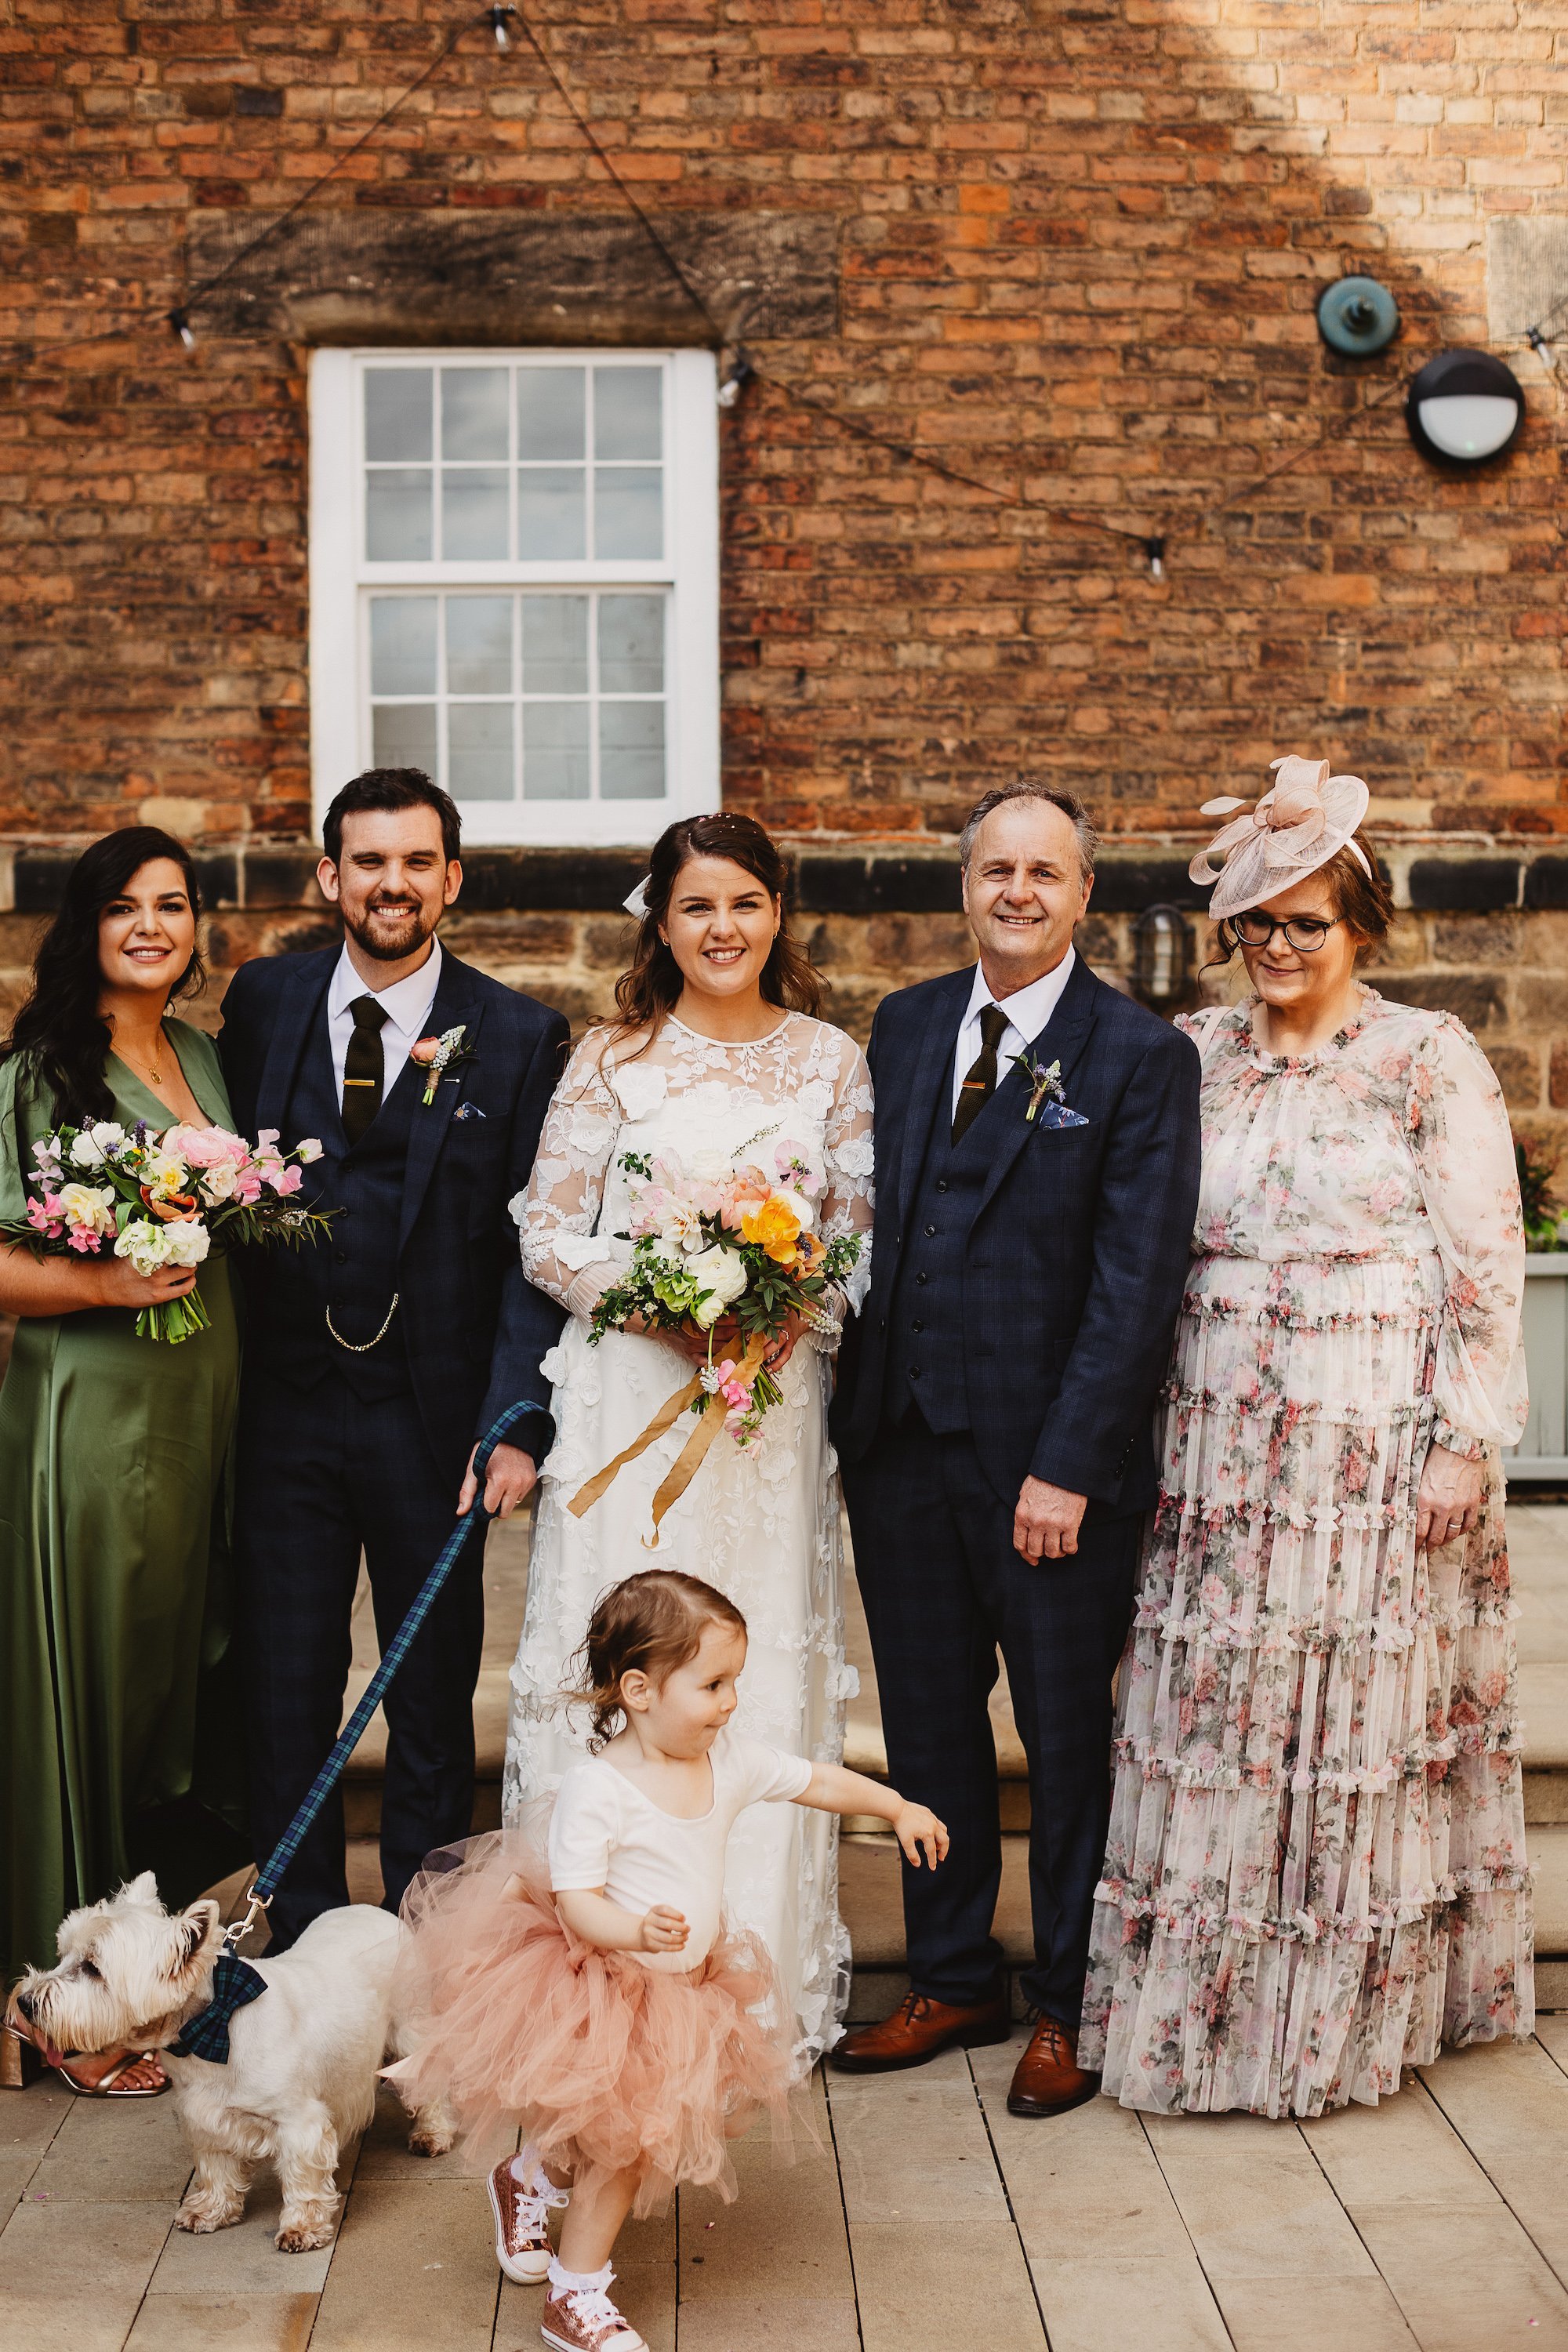 Beautiful bride Dani wore a wedding dress by Halfpenny London | Bobby top and Bay skirt with 3d embroidery